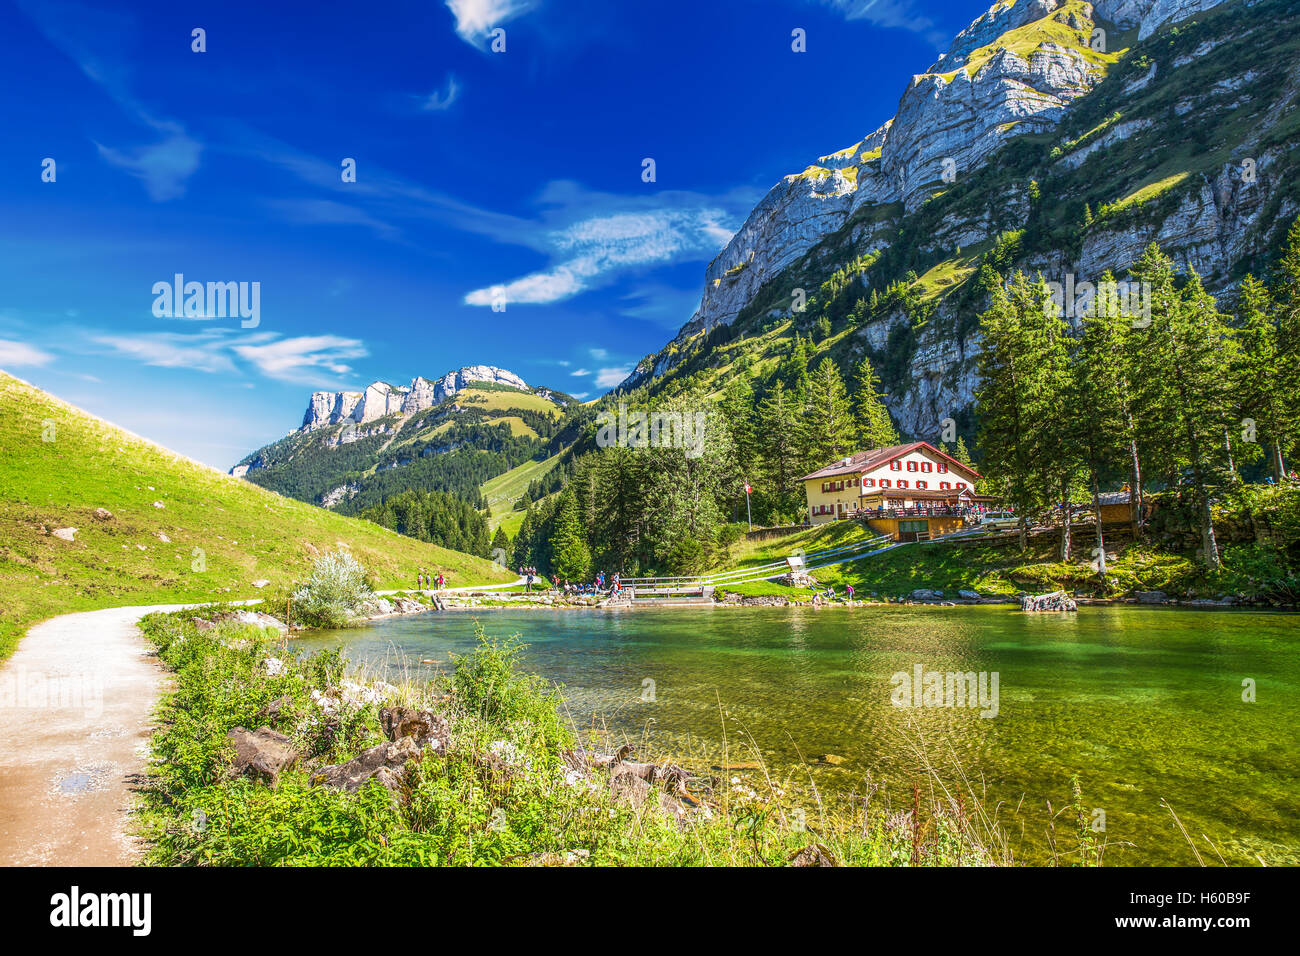 Tourquise clear Seealpsee with the Swiss Alps (mountain Santis) in the background, Appenzeller Land, Switzerland Stock Photo